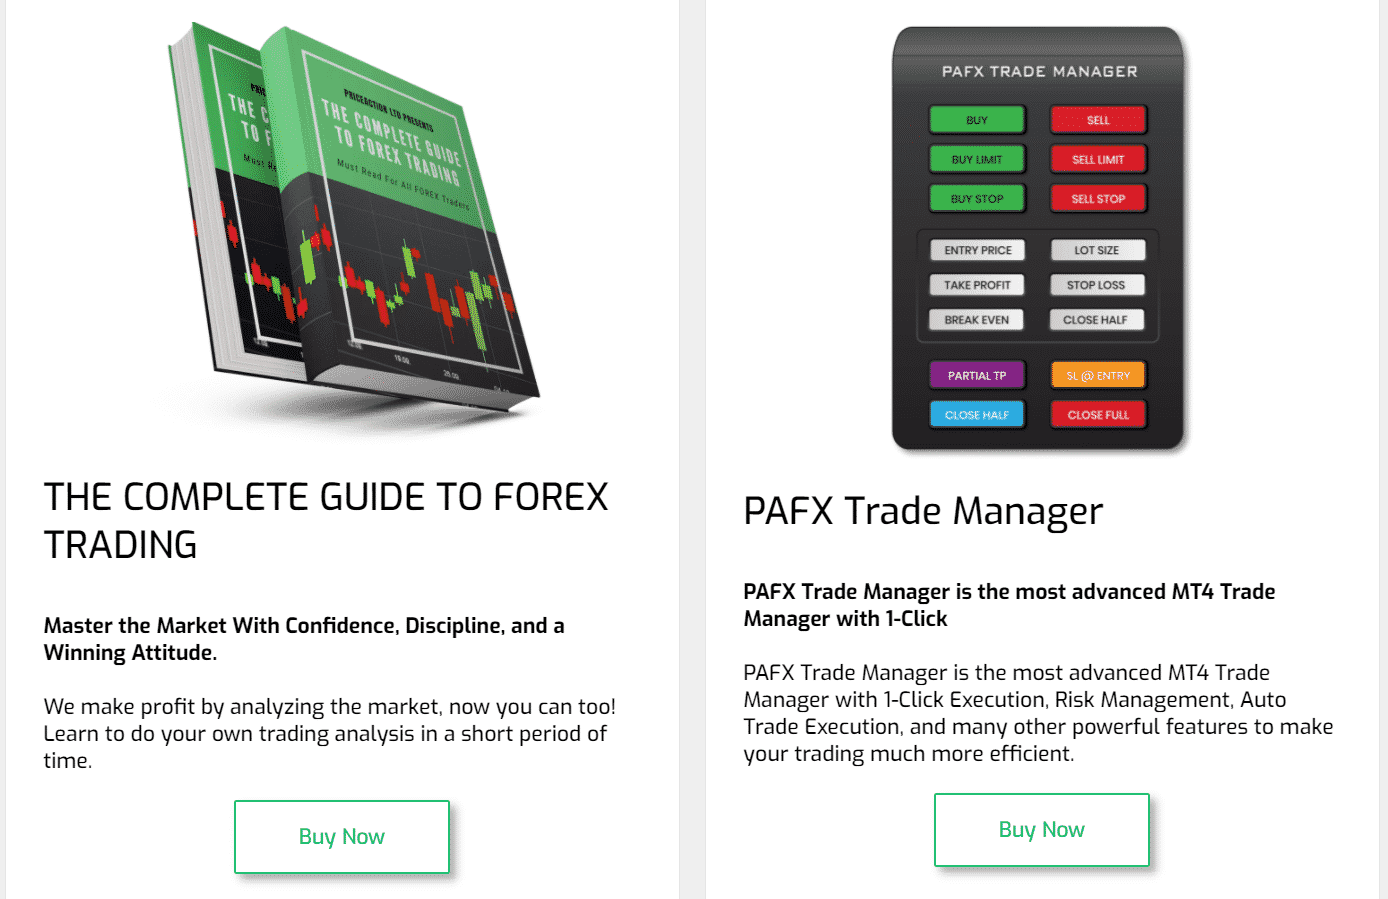 Price Action Forex products